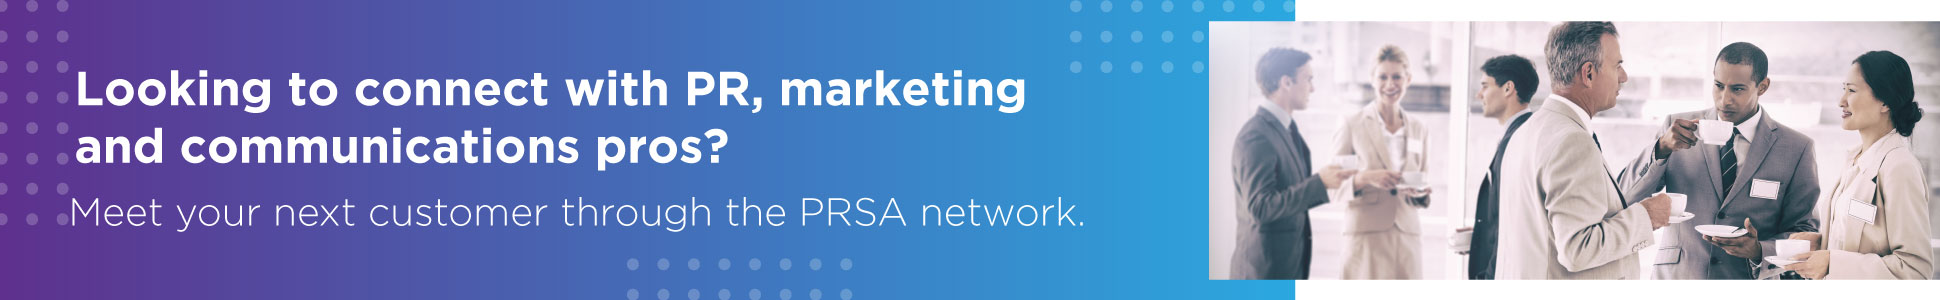 Looking to connect with PR, marketing and communications pros?